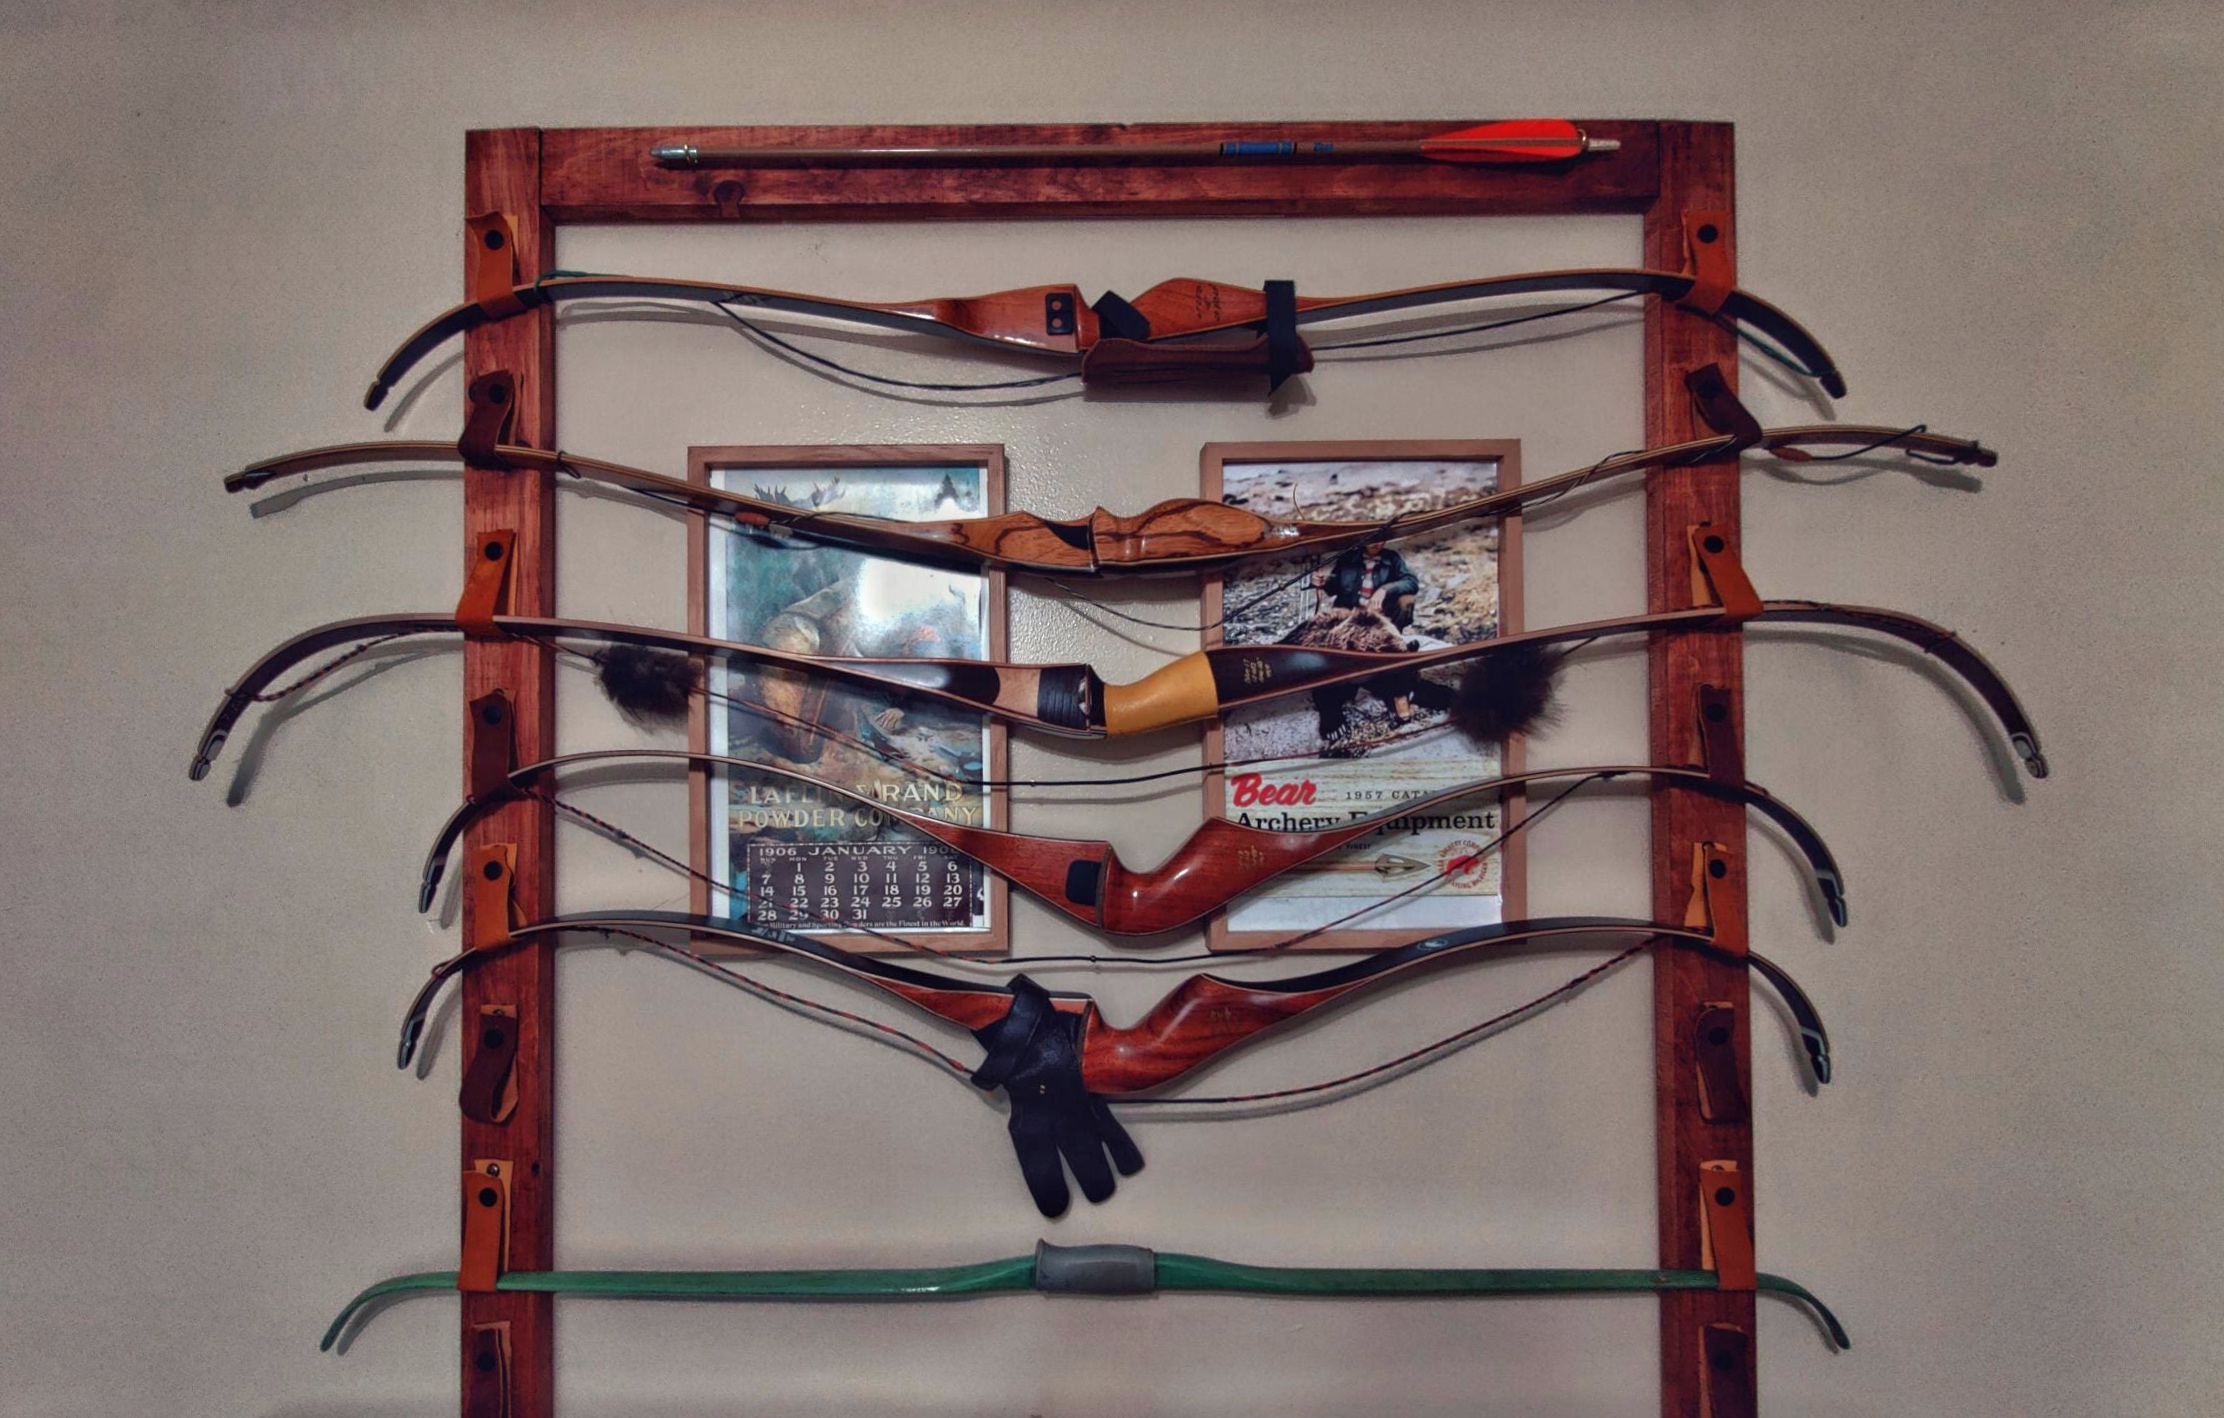 The author's finished bow rack.